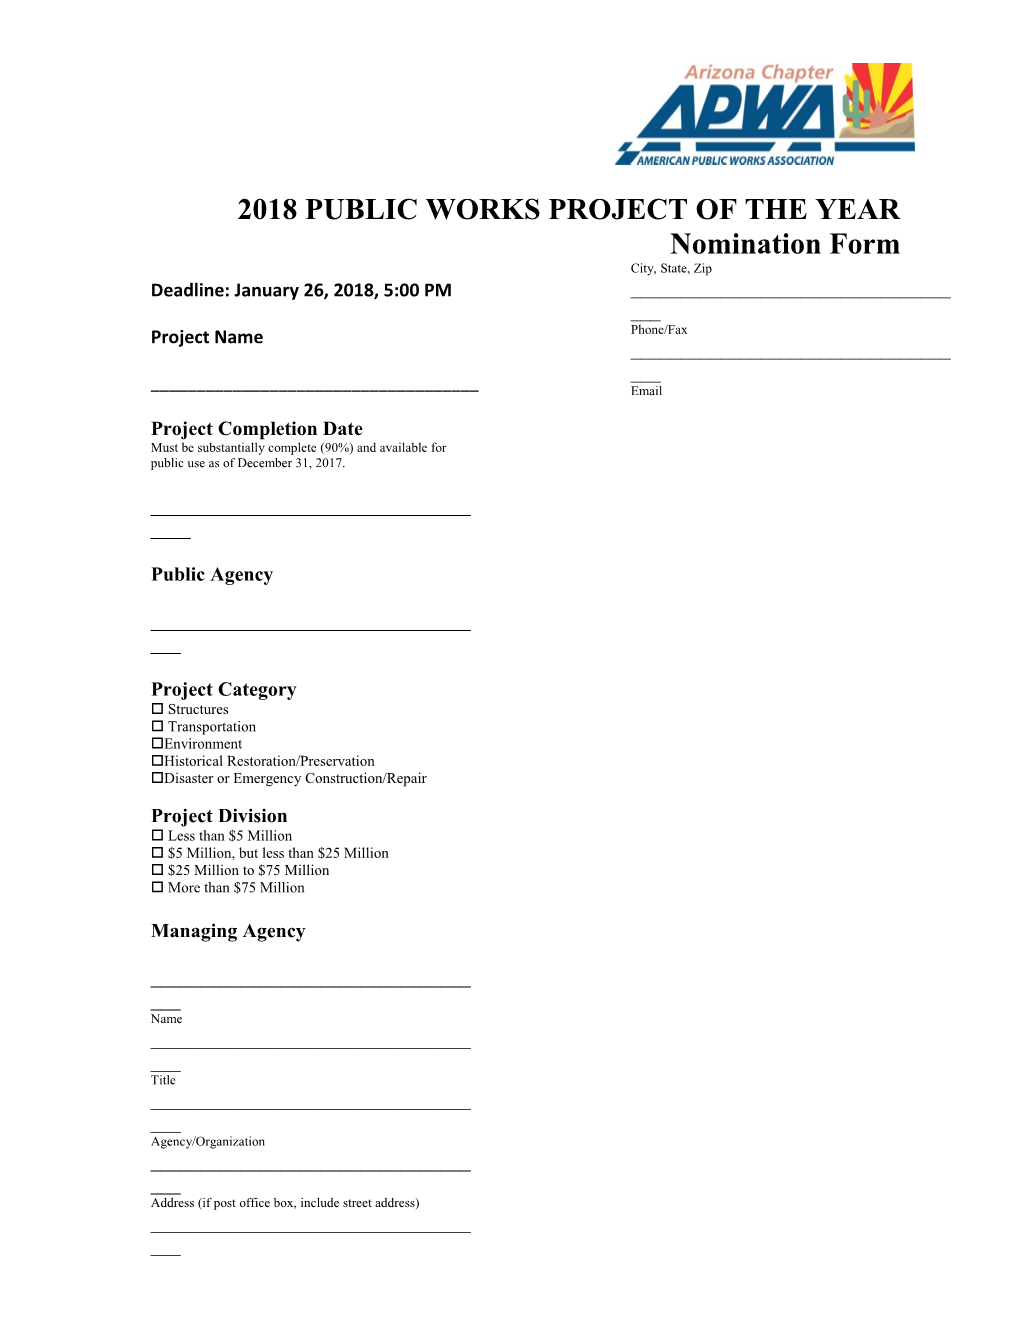 2018Public Works Project of the Year